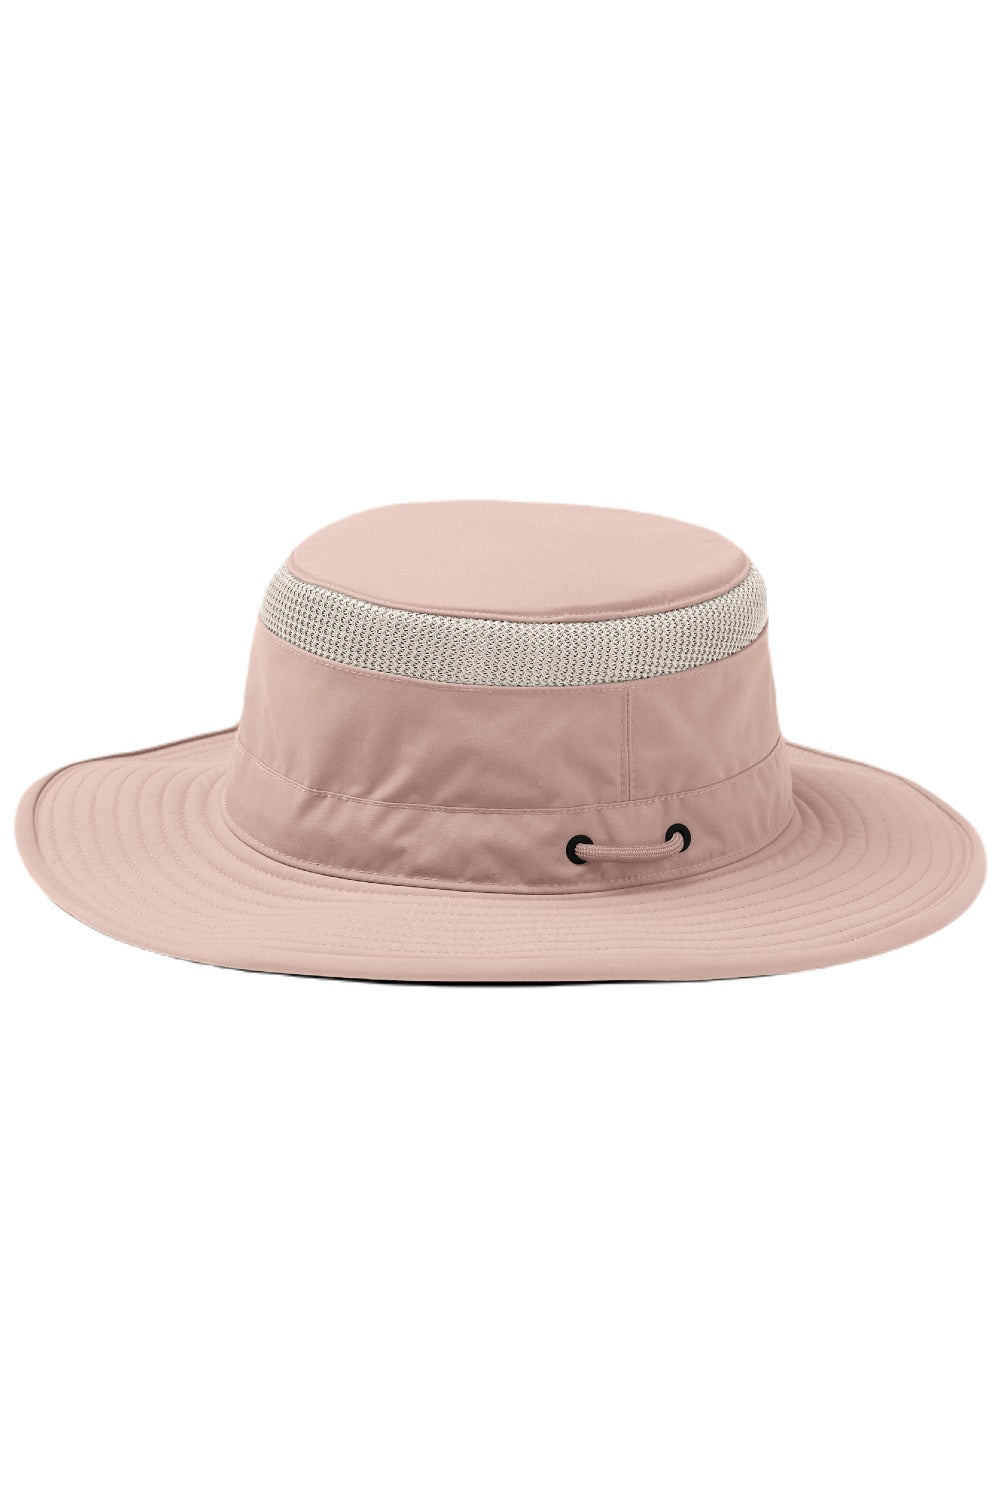 Tilley Hats Airflo Boonie In Mauve 